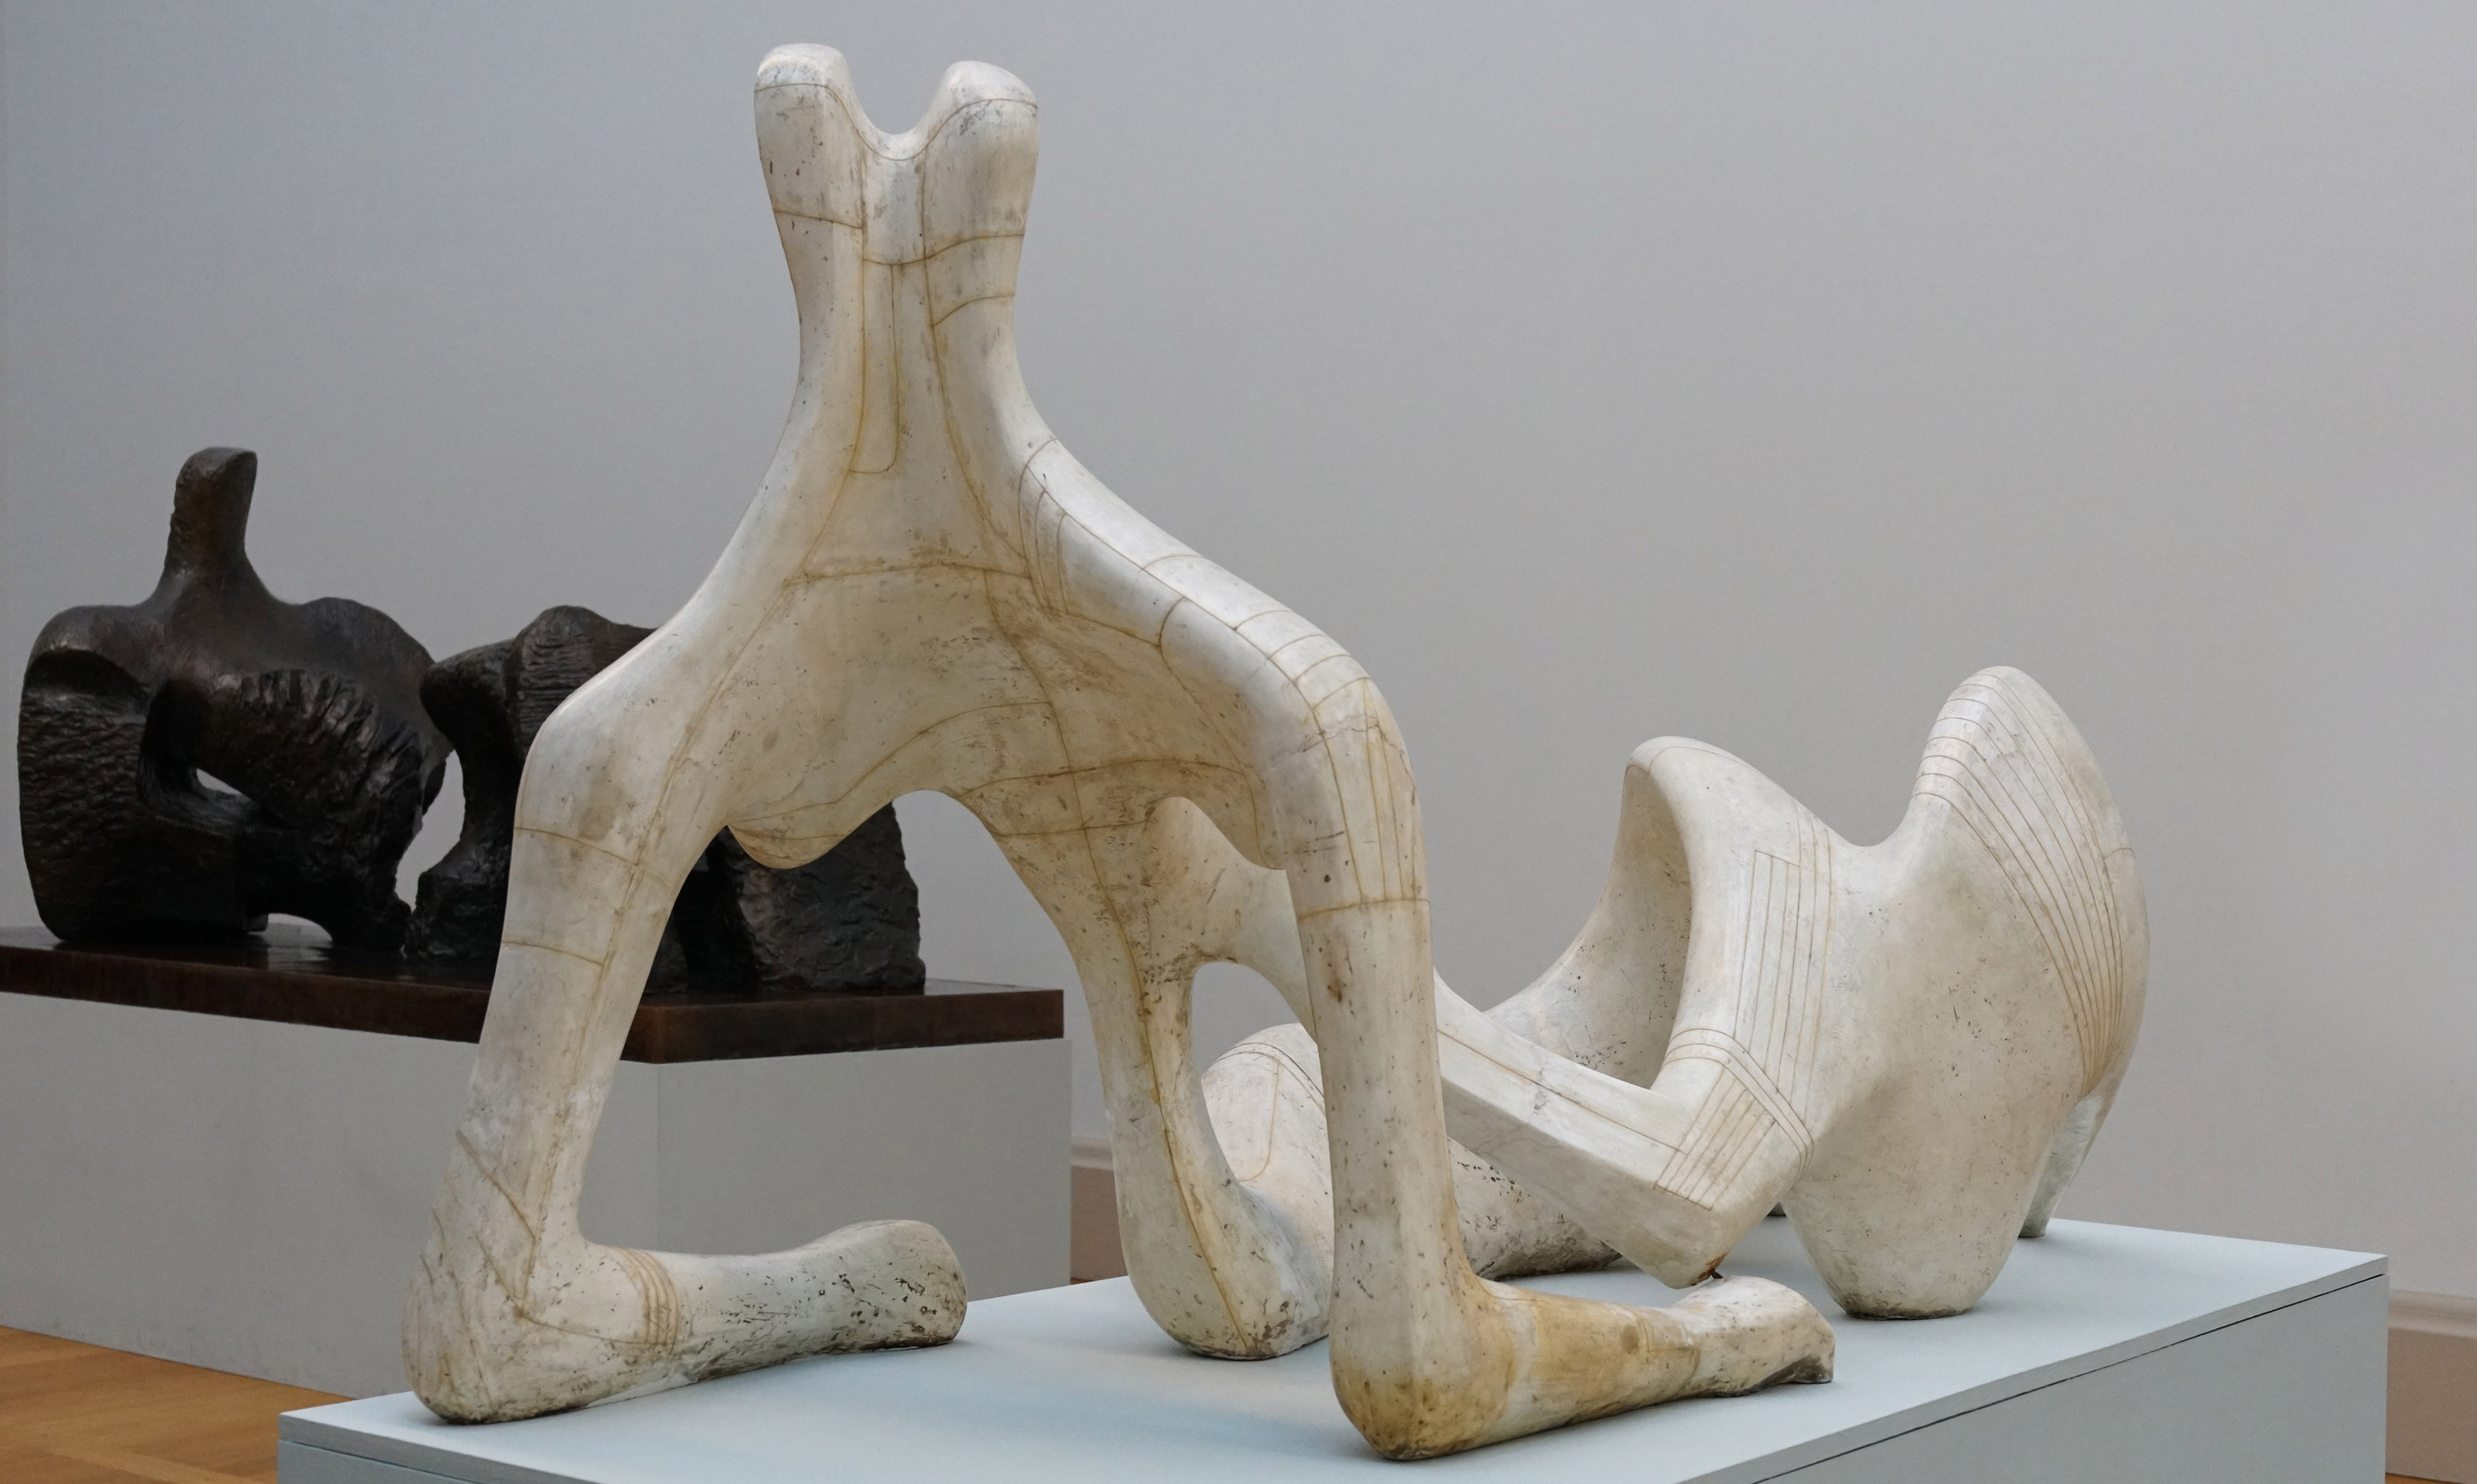 Henry Moore, Reclining Figure, 1951, plaster and string, 105.4 x 227.3 x 89.2 cm (Tate Britain)